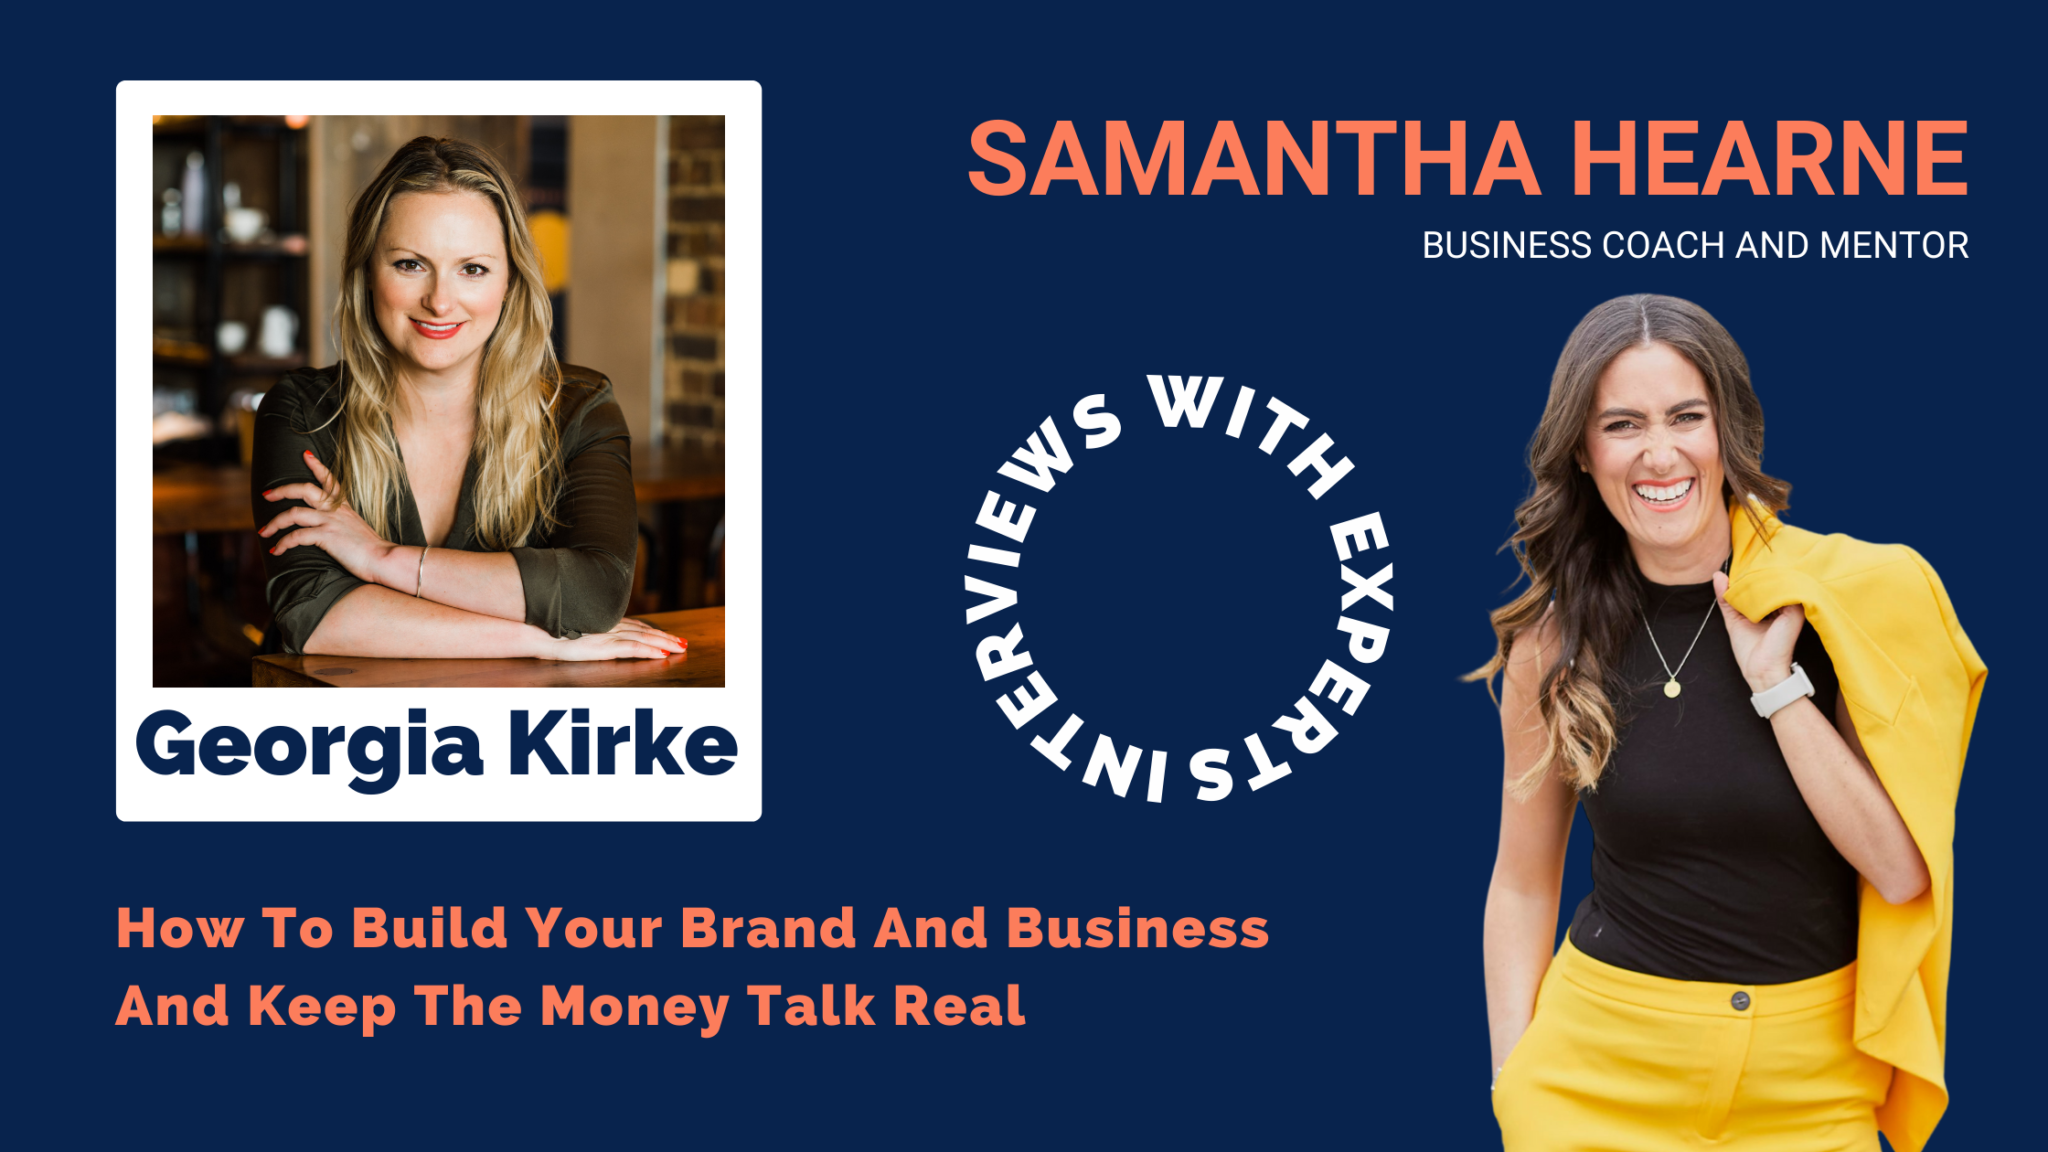 How To Build Your Brand And Business And Keep The Money Talk Real By Georgia Kirke with special guest Samantha Hearne